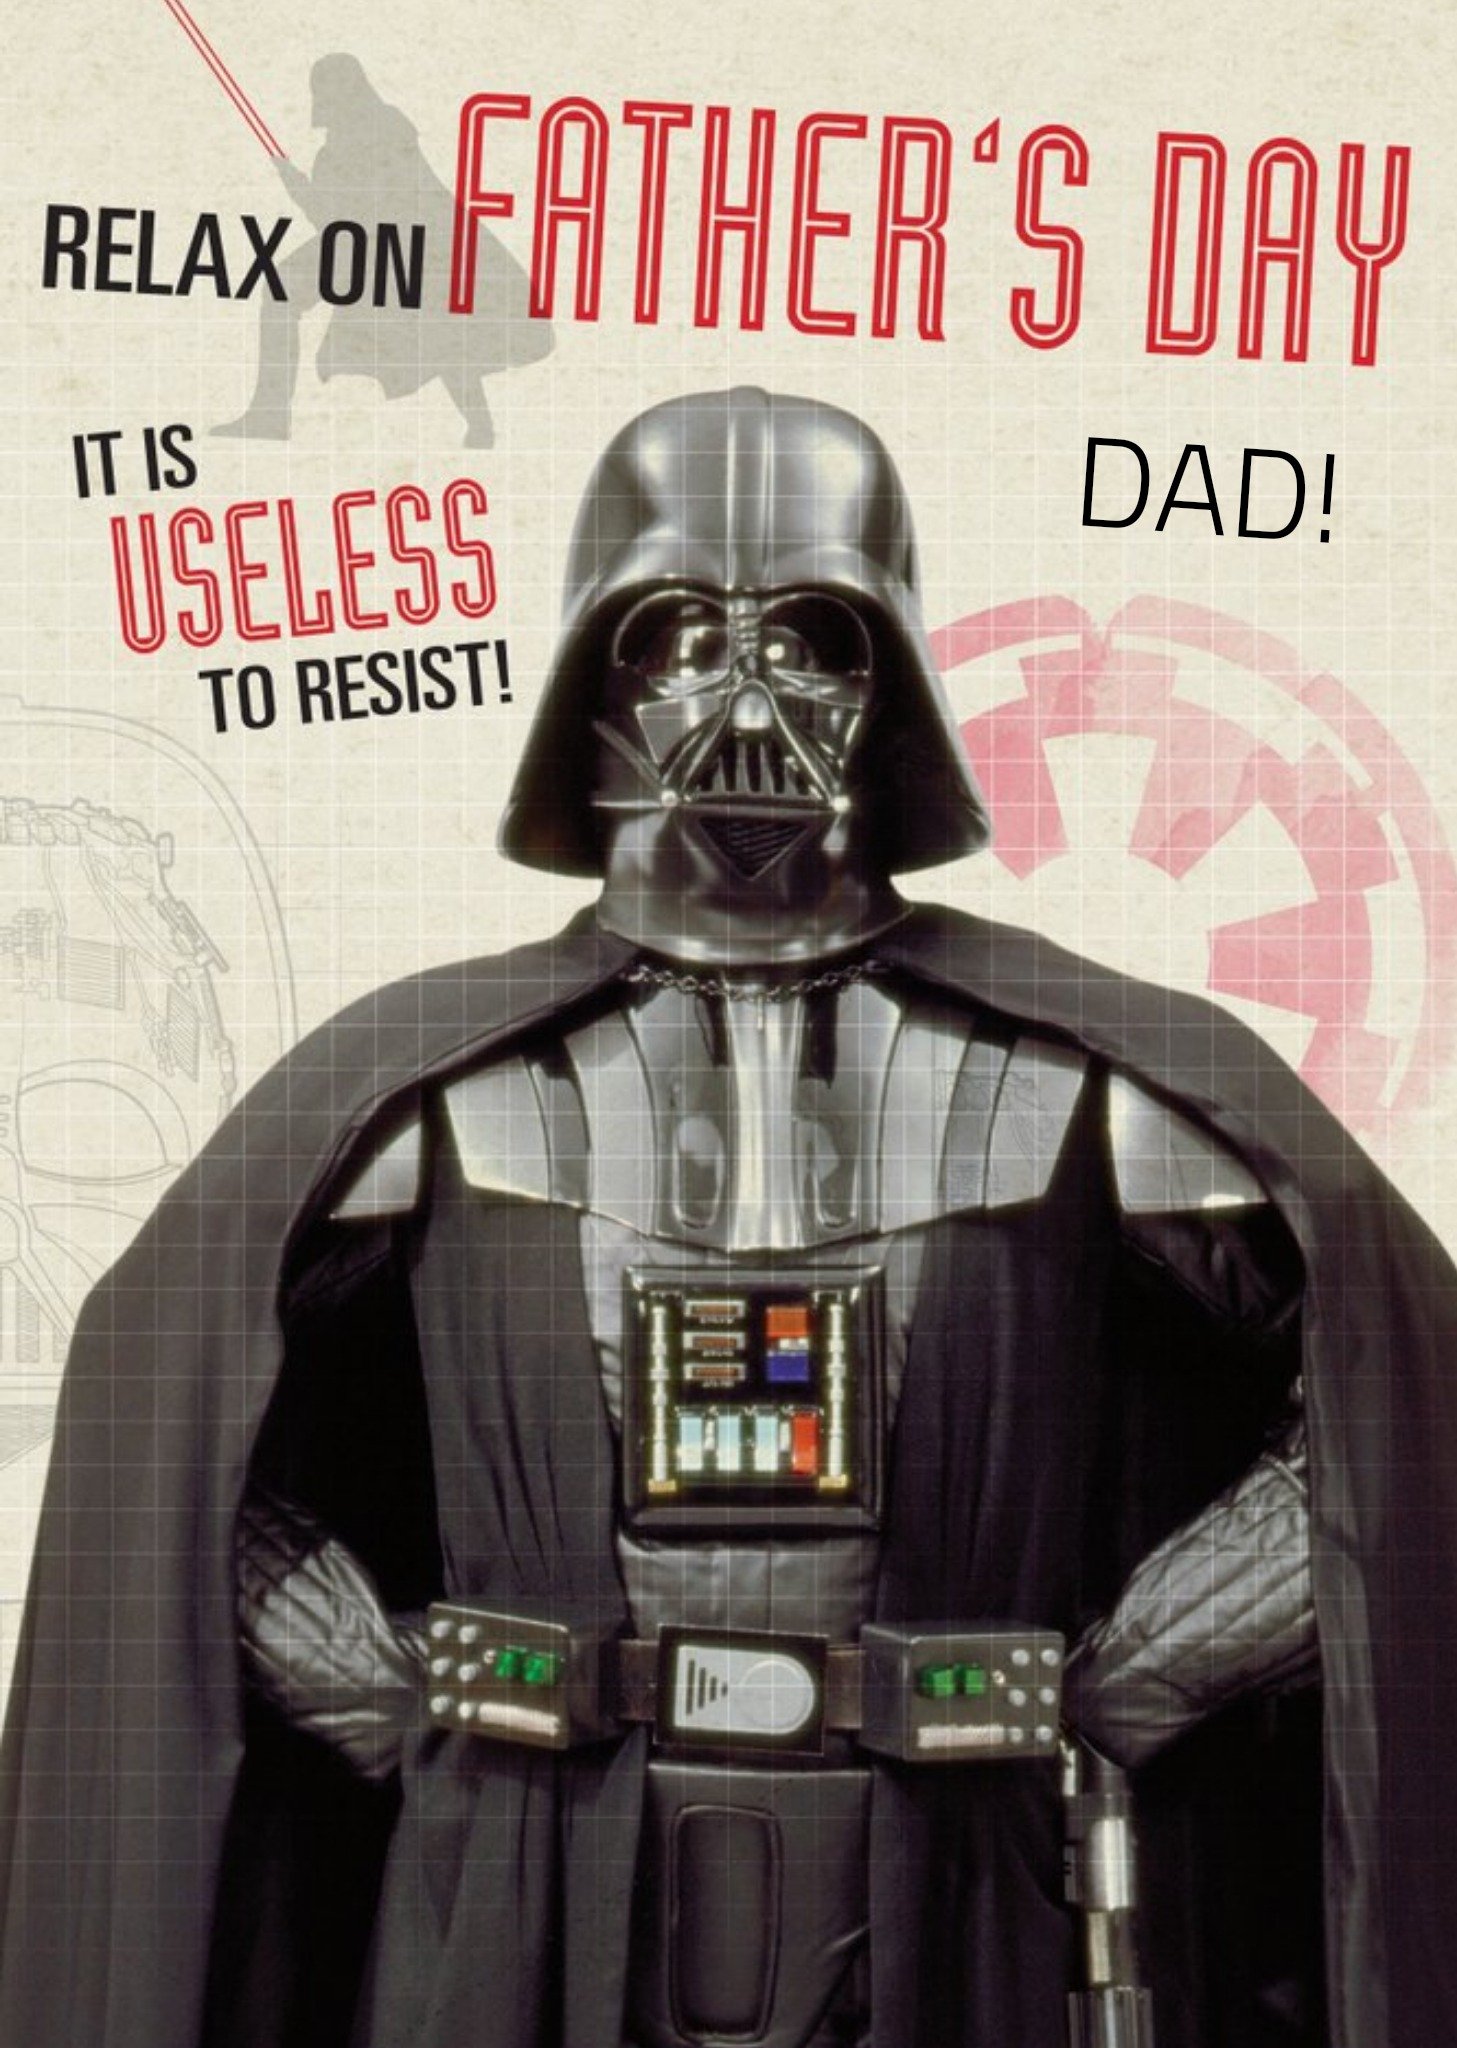 Disney Star Wars Darth Vader Relax On Father's Day Card Ecard